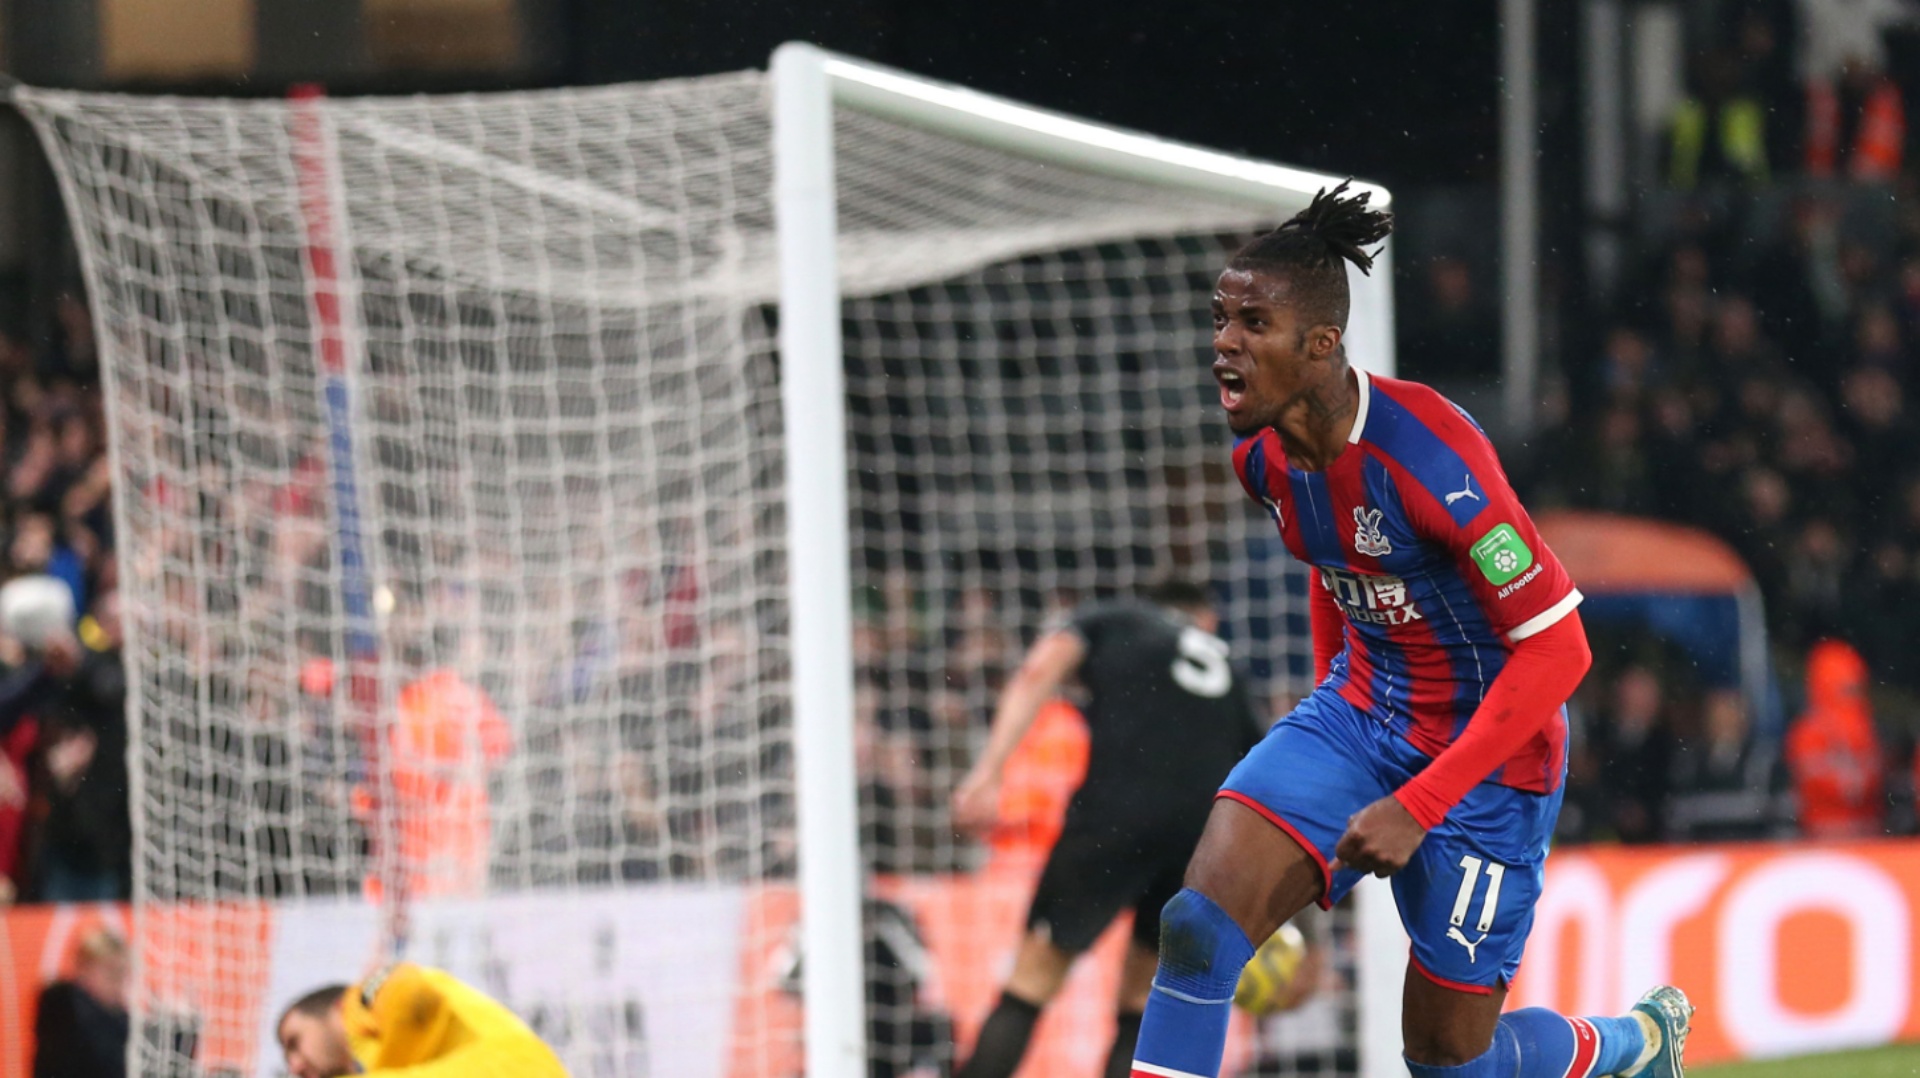 Wilfried Zaha, who ‘came from nothing’, donates 10% of his Crystal Palace wages to charity to put smiles on kids’ faces